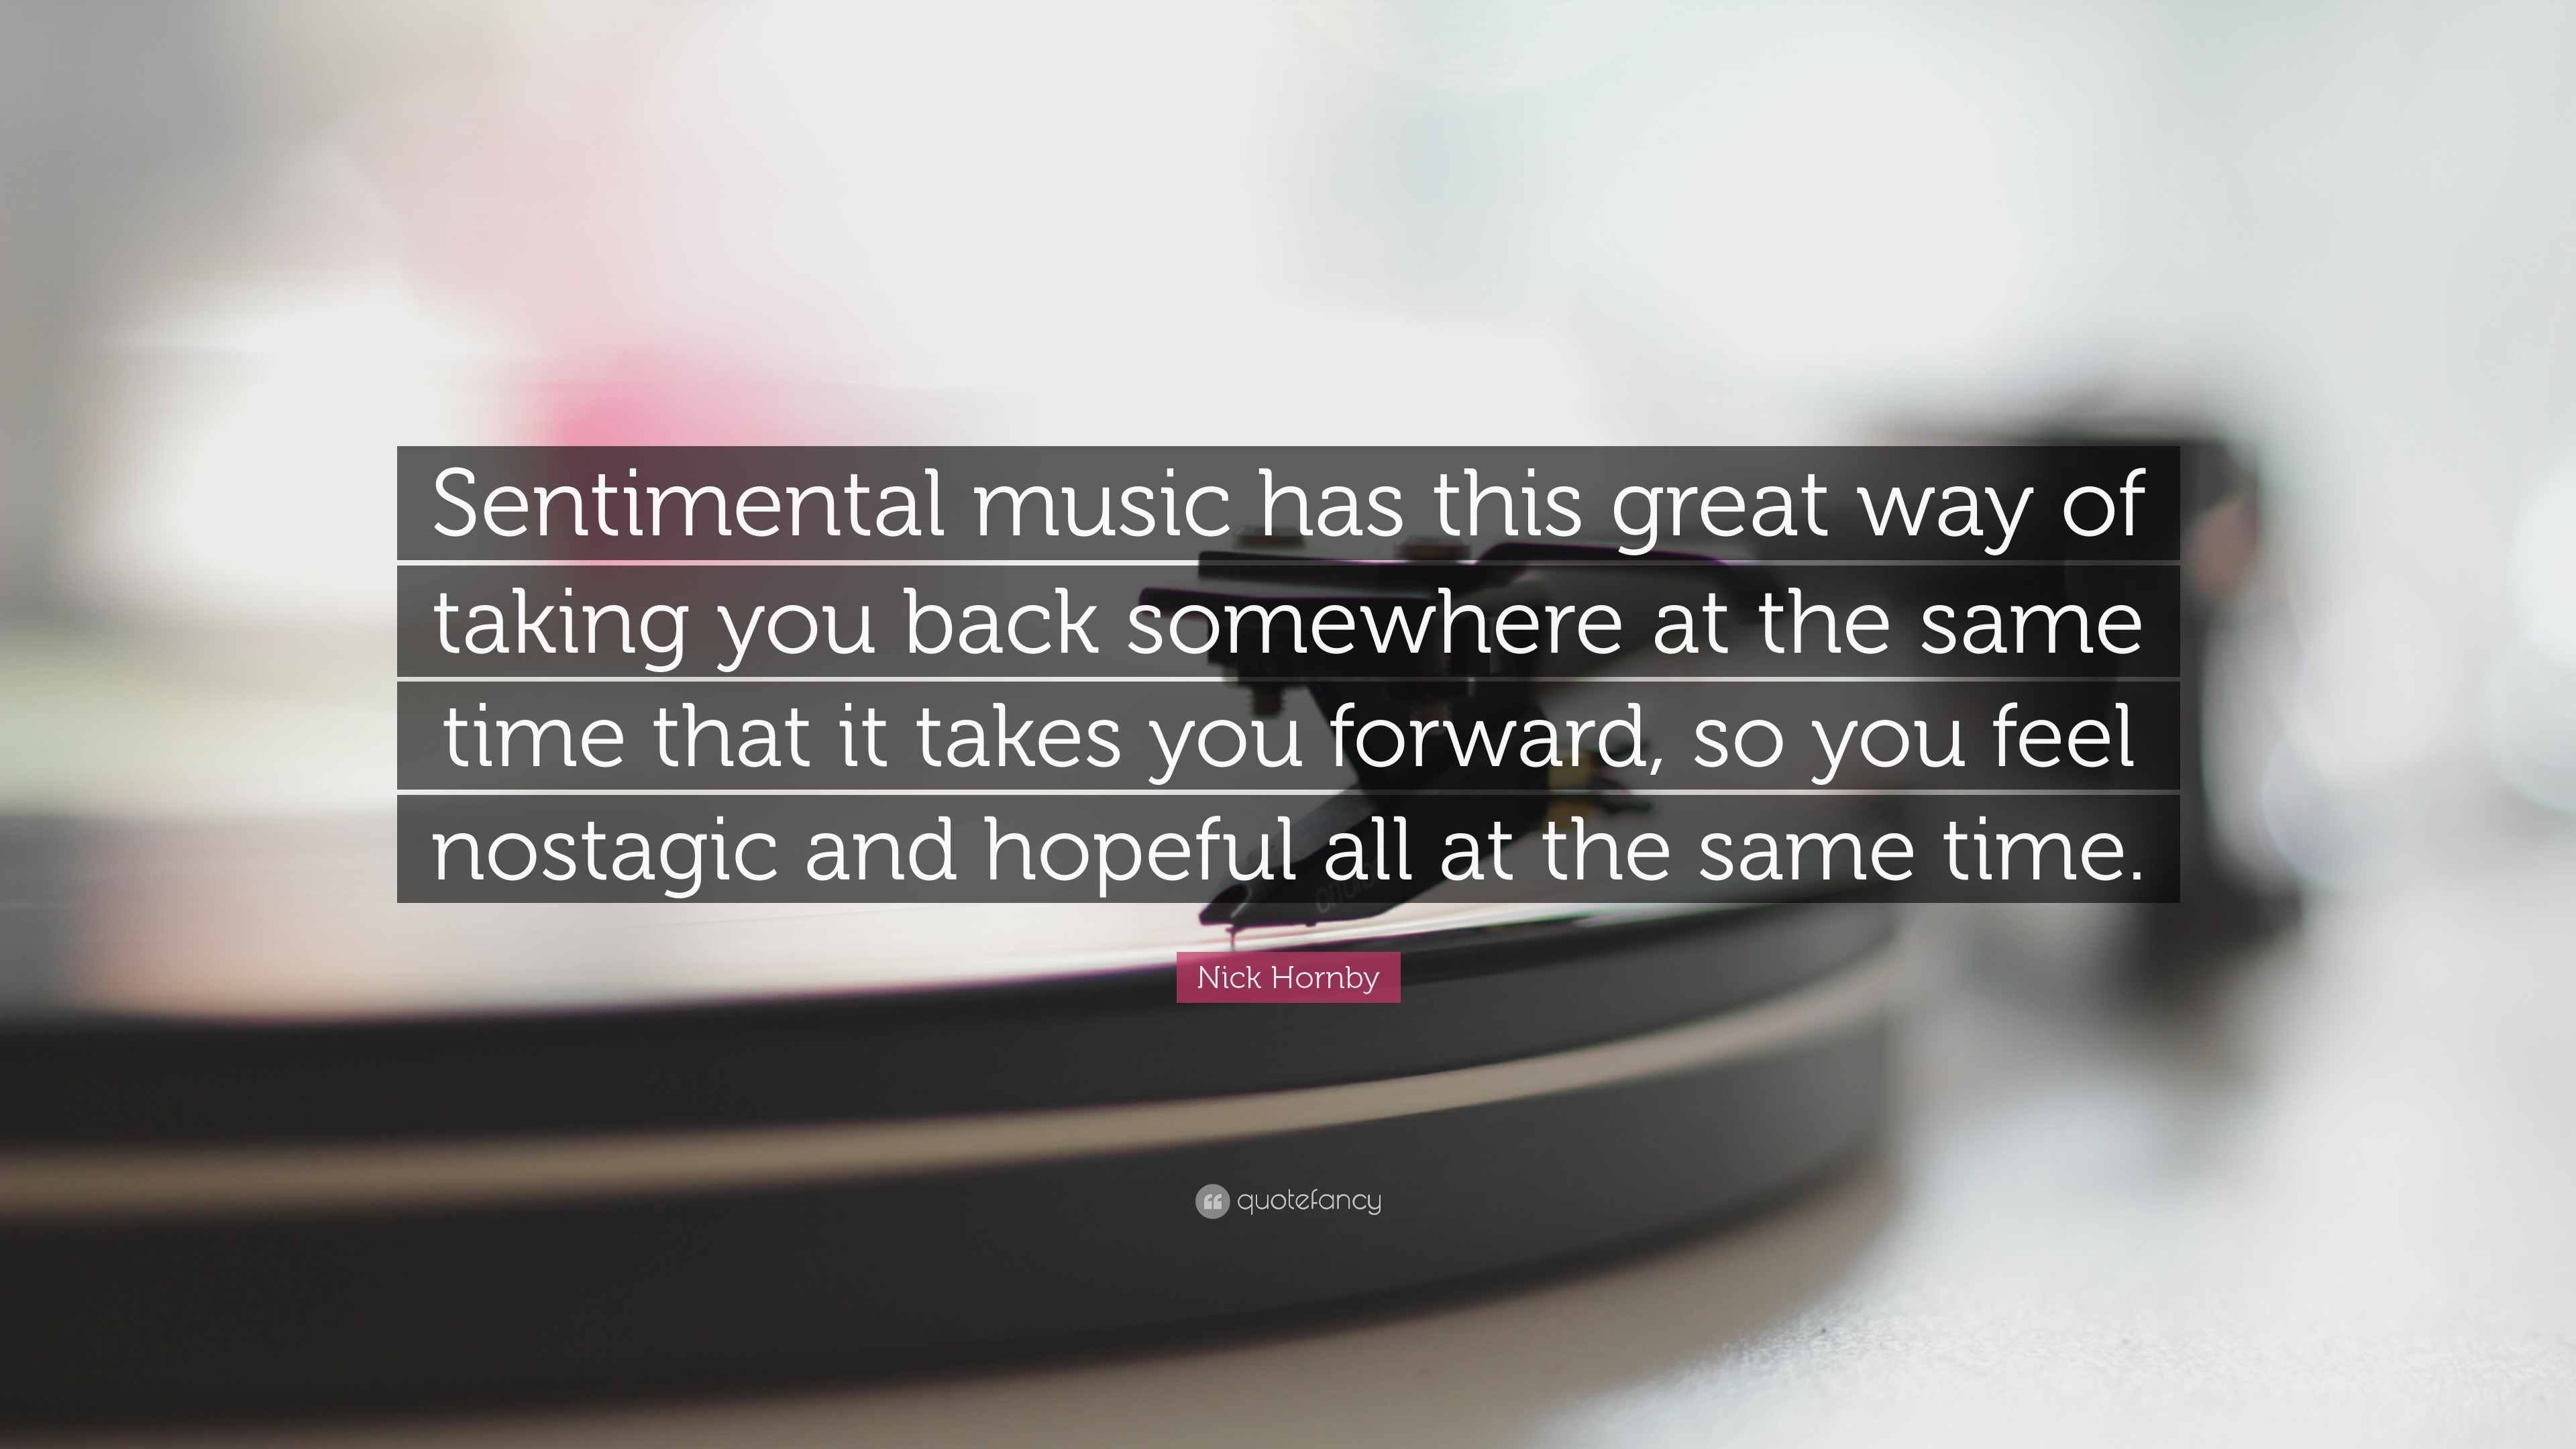 Nick Hornby Quote “Sentimental music has this great way of taking you back somewhere